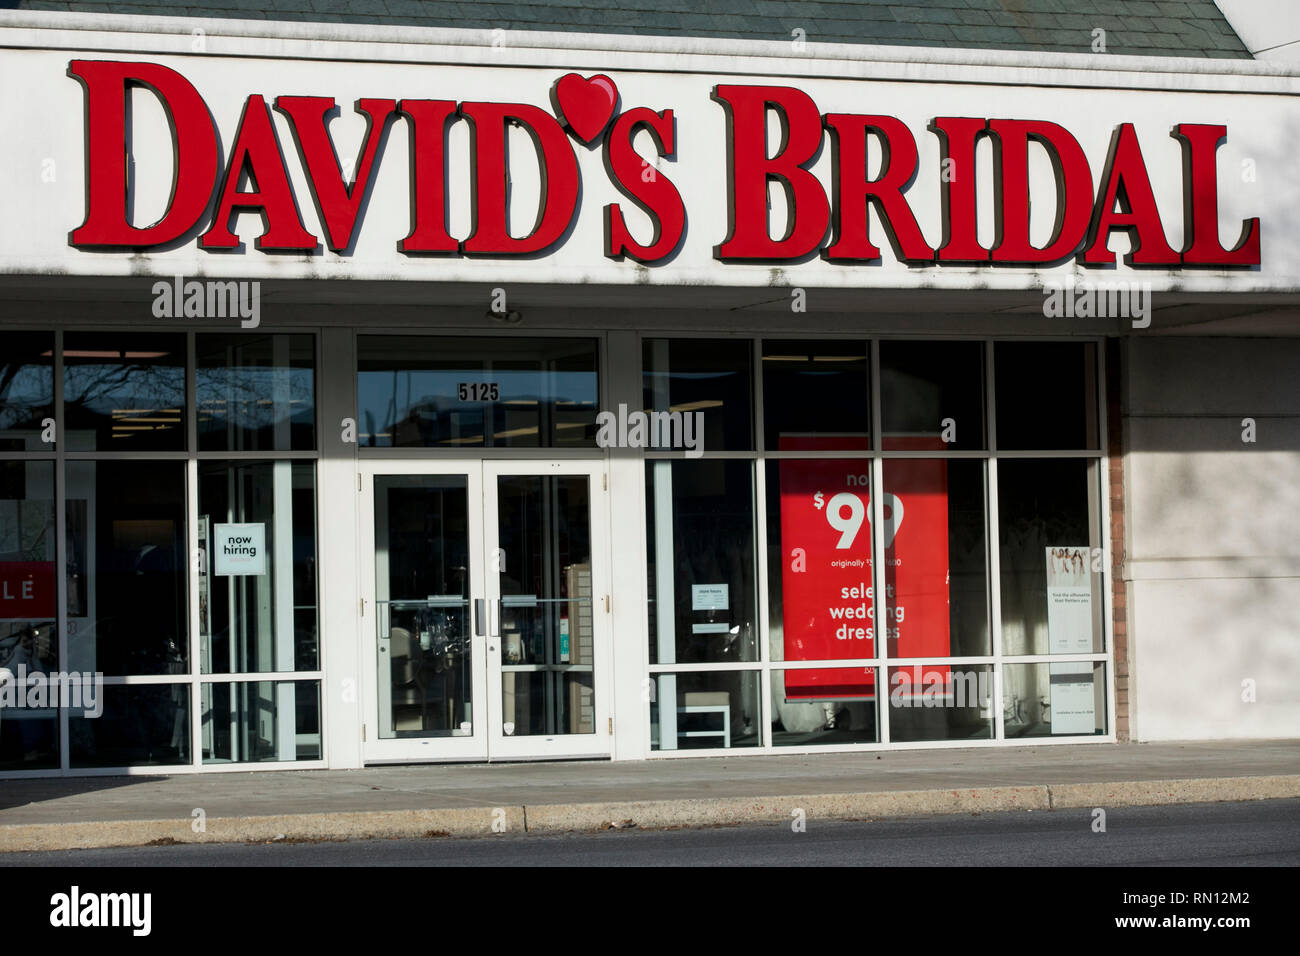 A logo sign outside of a David's Bridal retail store location in Harrisburg, Pennsylvania on February 9, 2019. Stock Photo